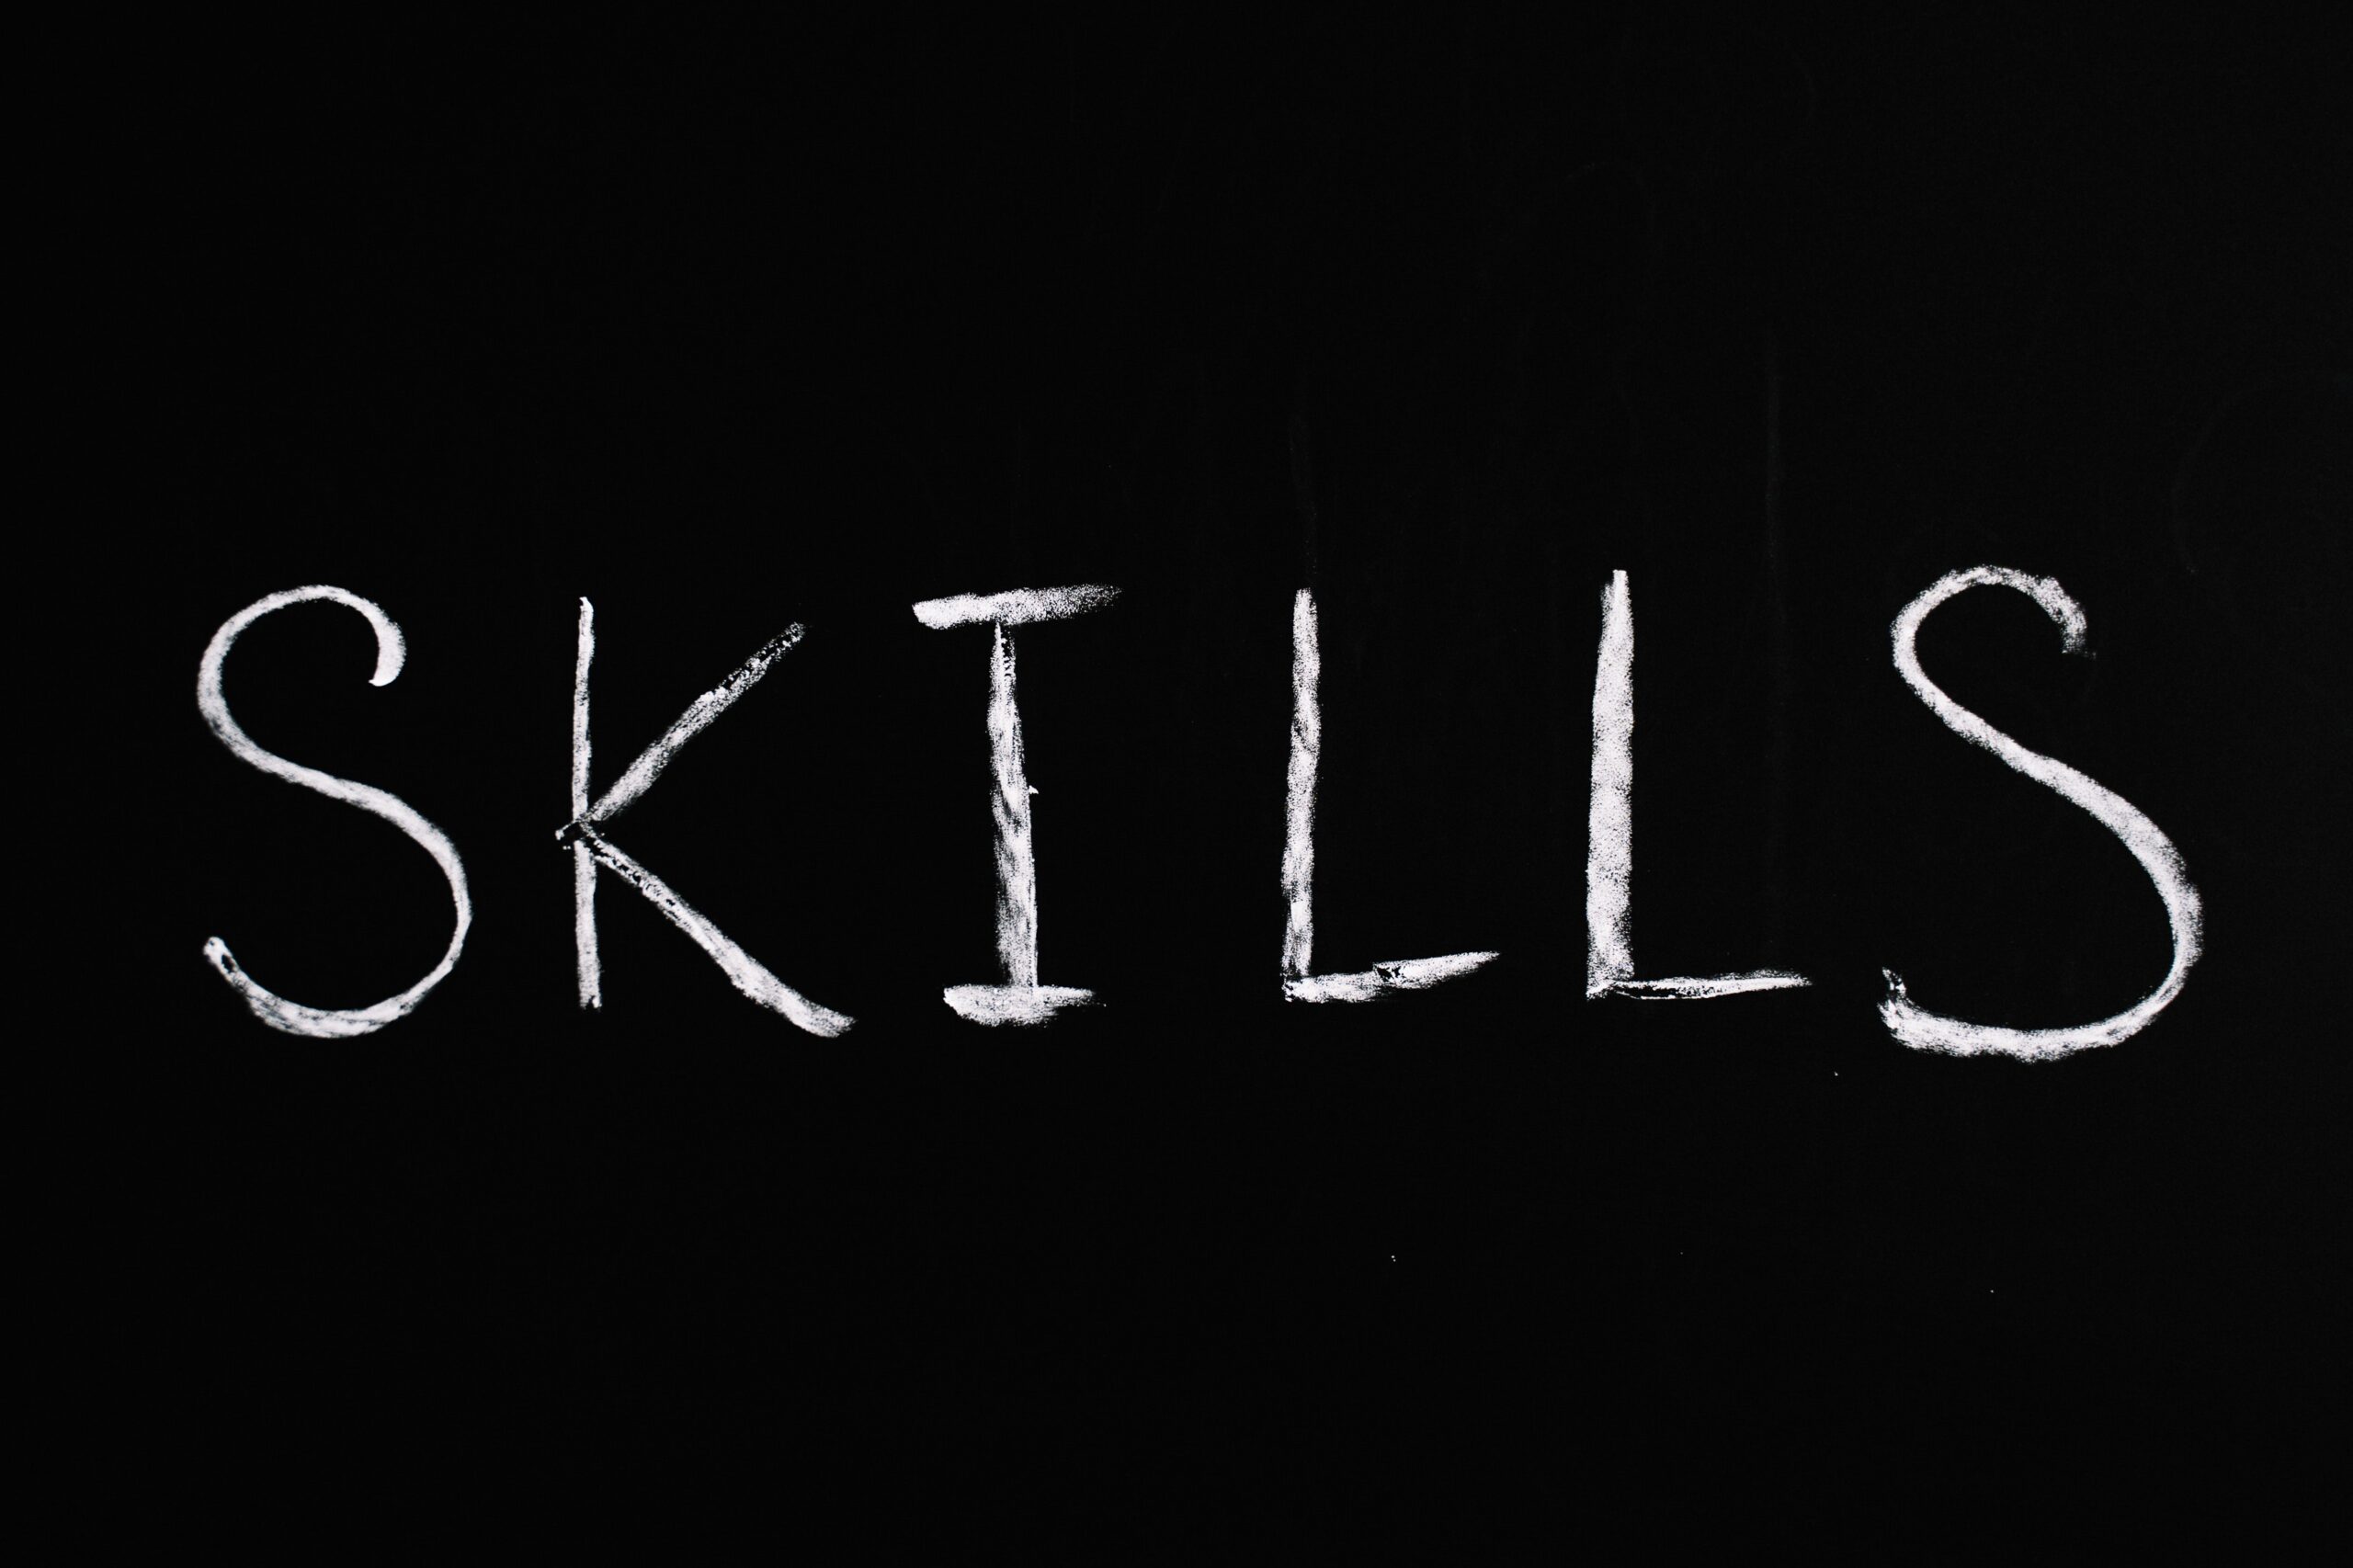 The word "skills" written in white chalk on a blackboard, symbolizing educational, professional, or gaming development concepts.